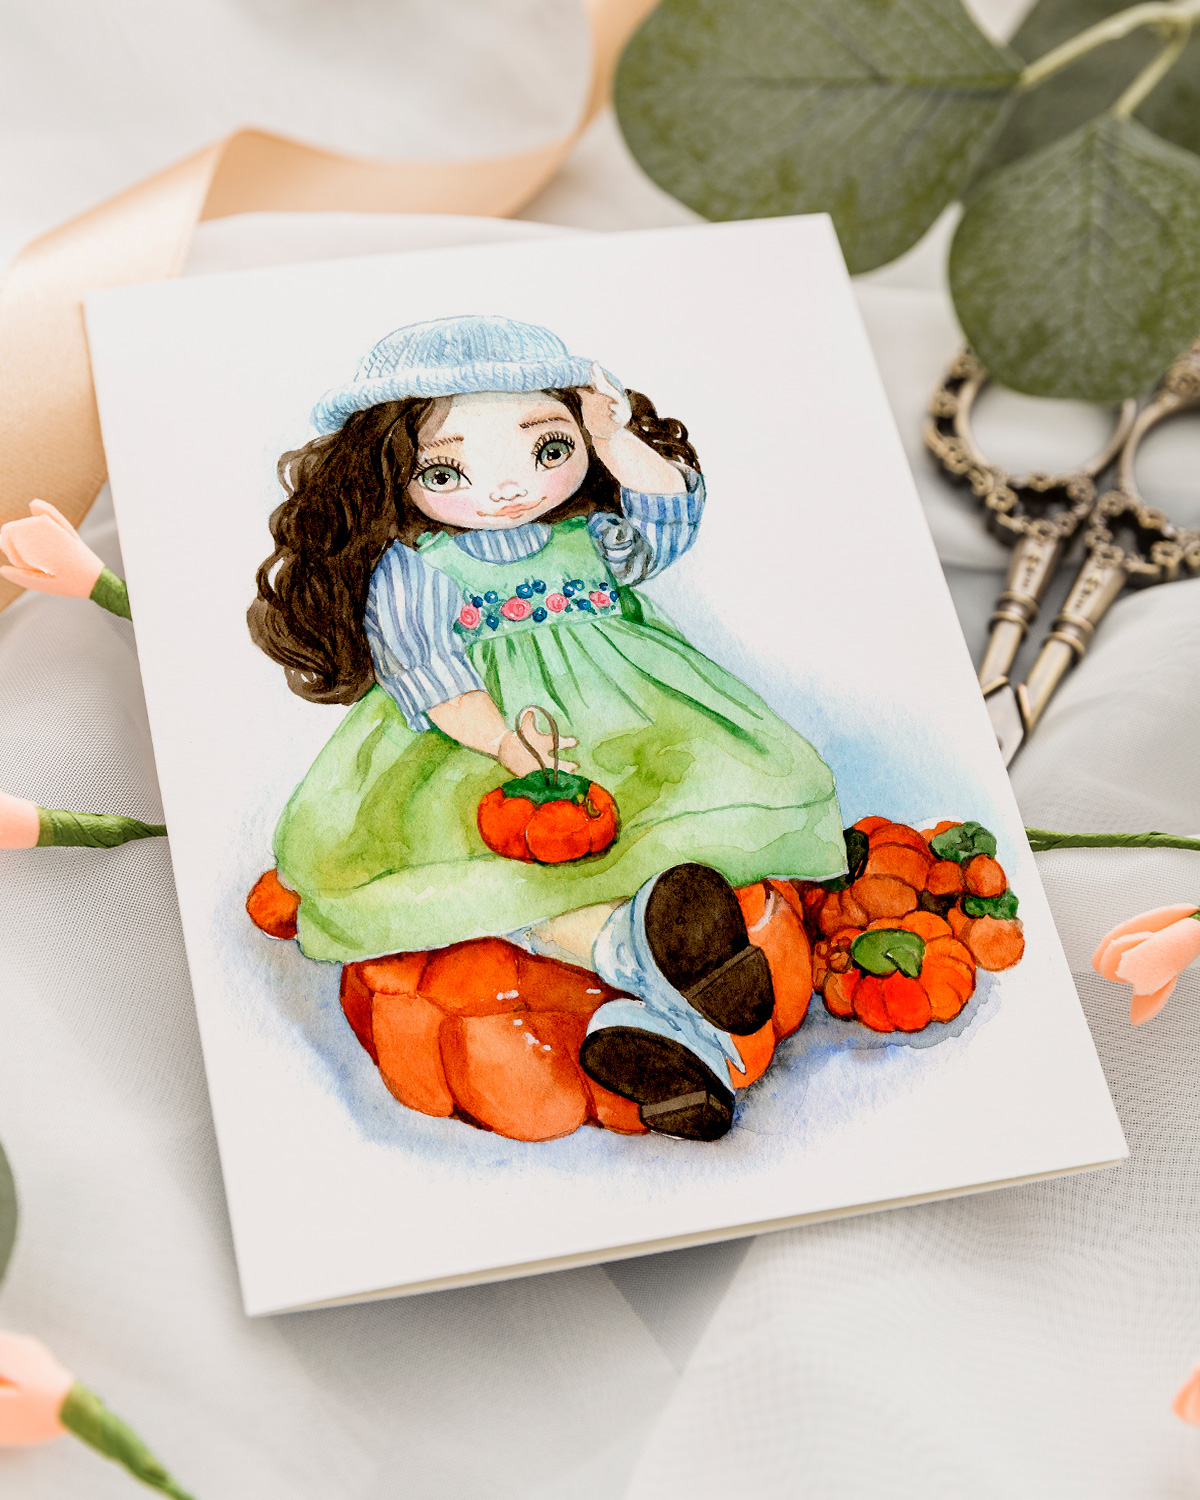 Handmade cards with dolls and pets